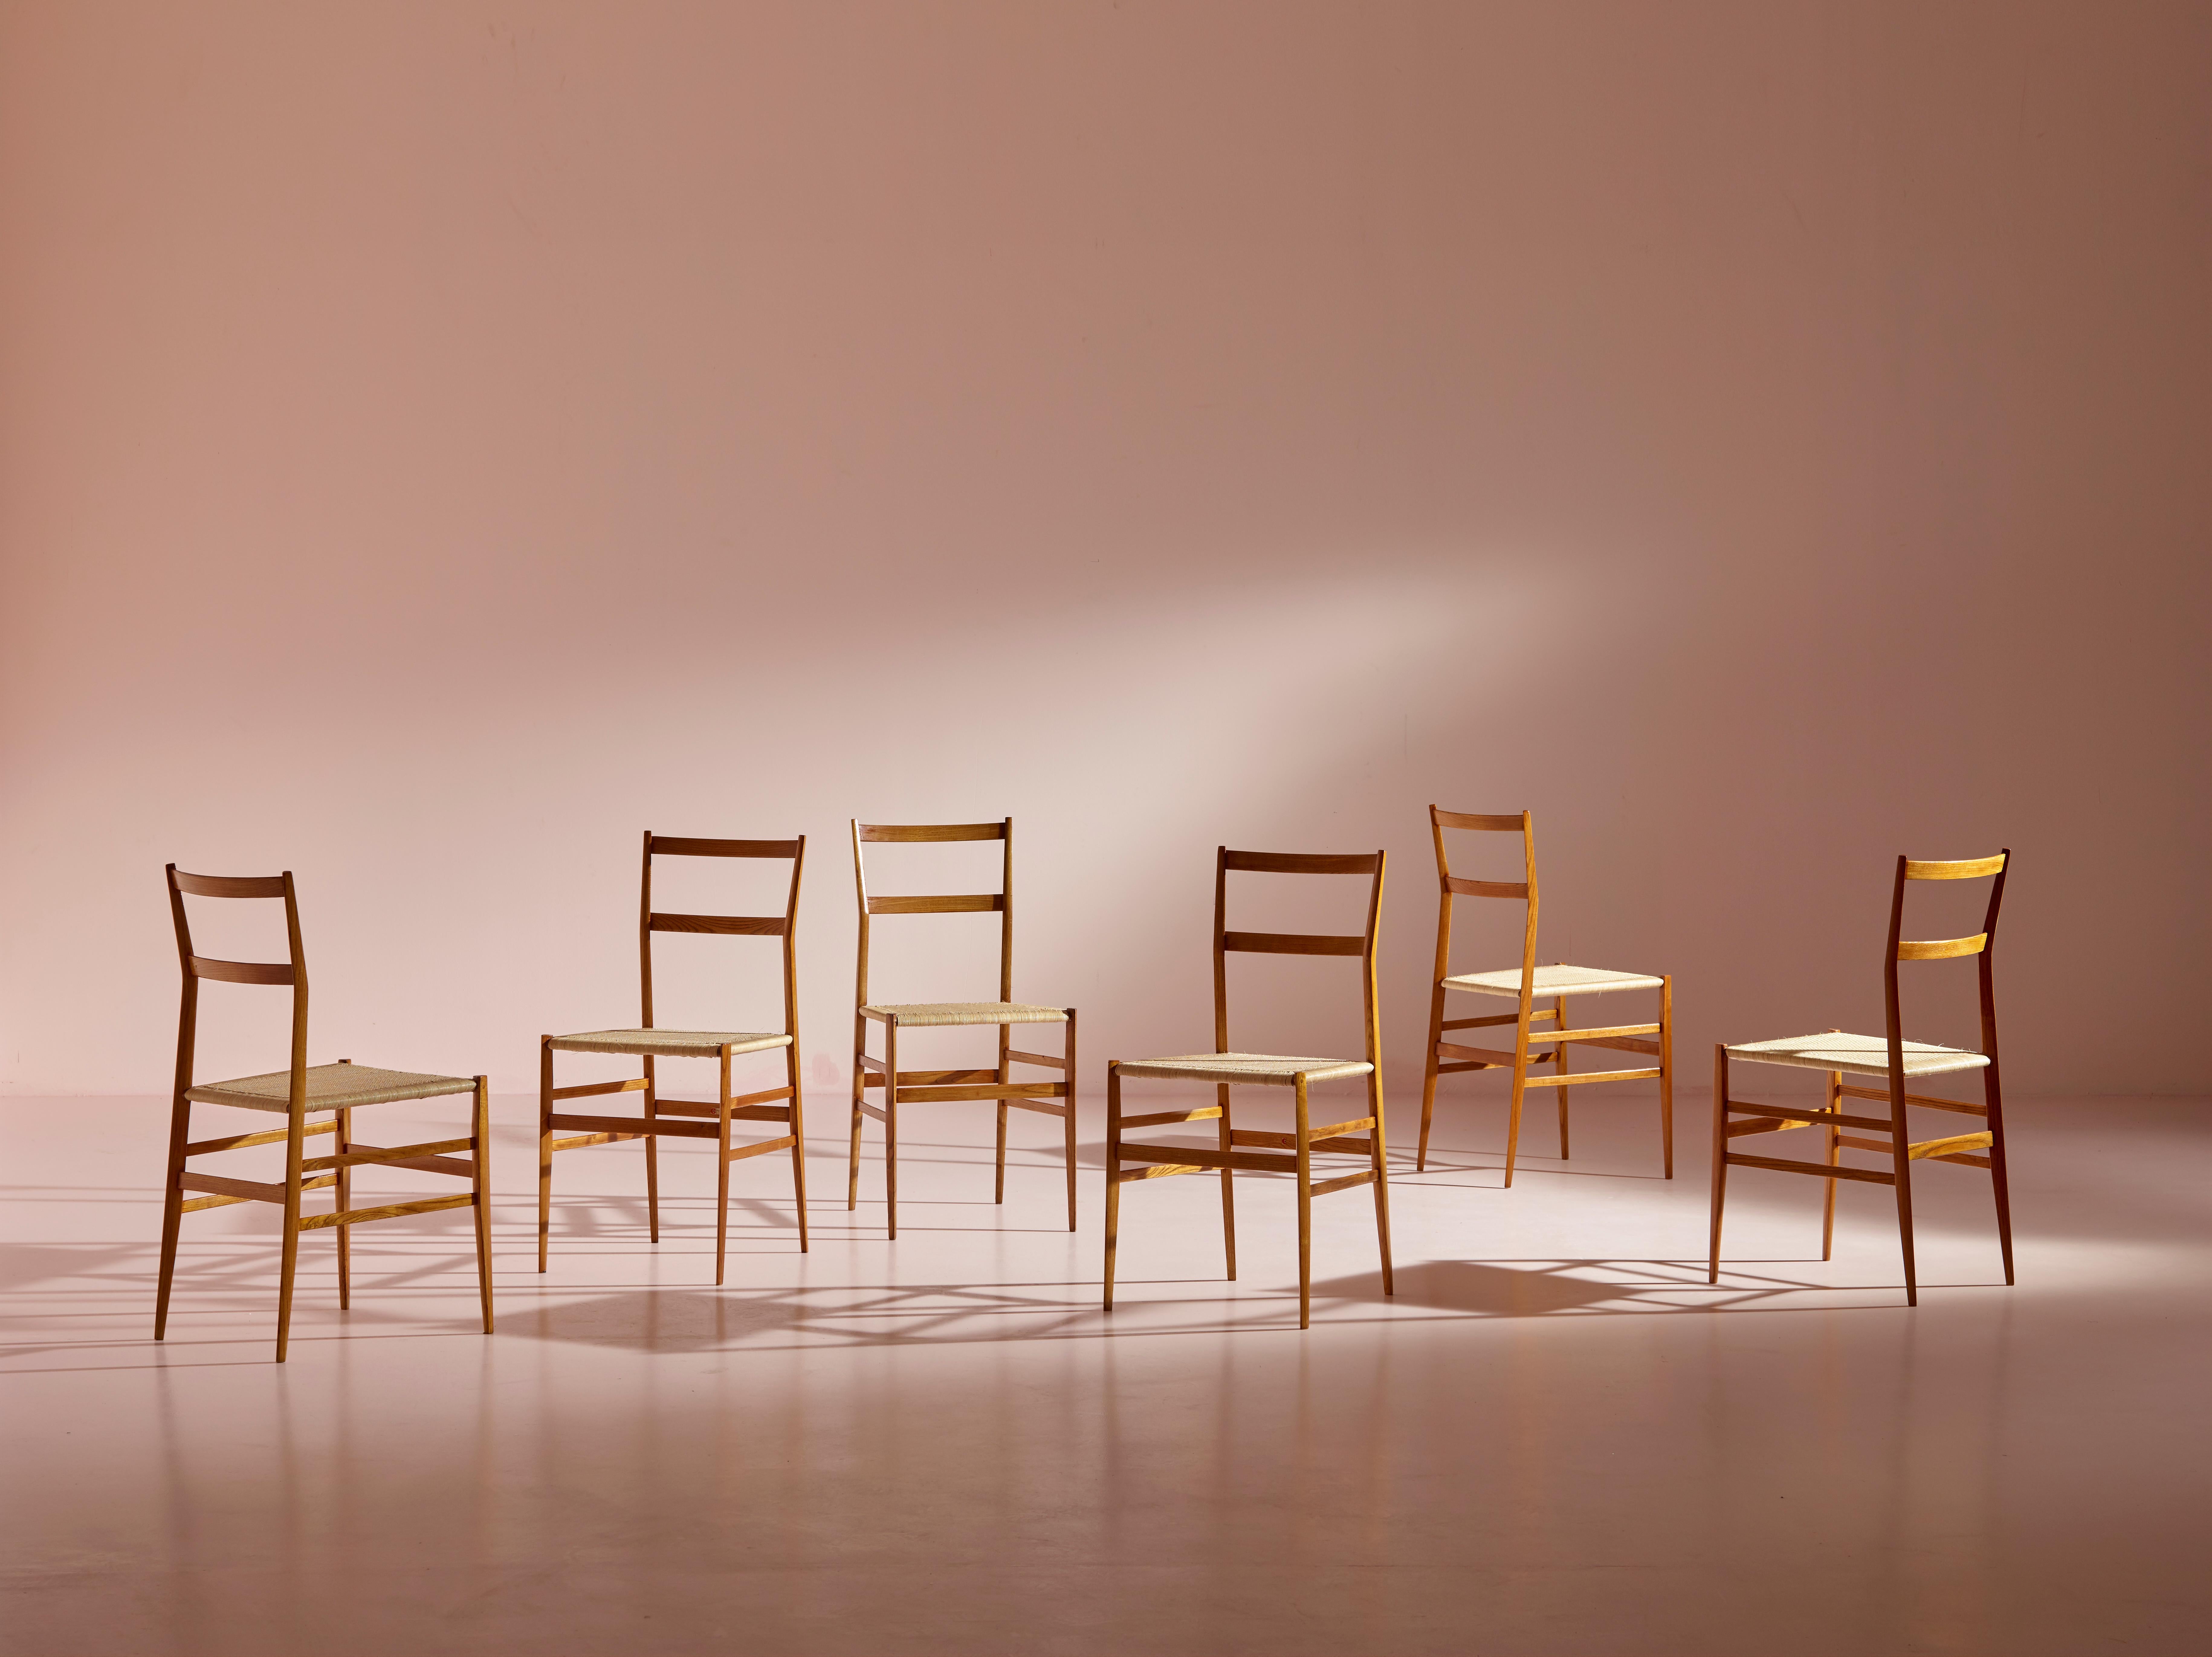 A set of six Superleggera chairs, produced by Cassina in the early 1960s and designed by Gio Ponti, has undergone professional restoration while preserving and refinishing their ash frames in the original color. The old woven straw seats have been